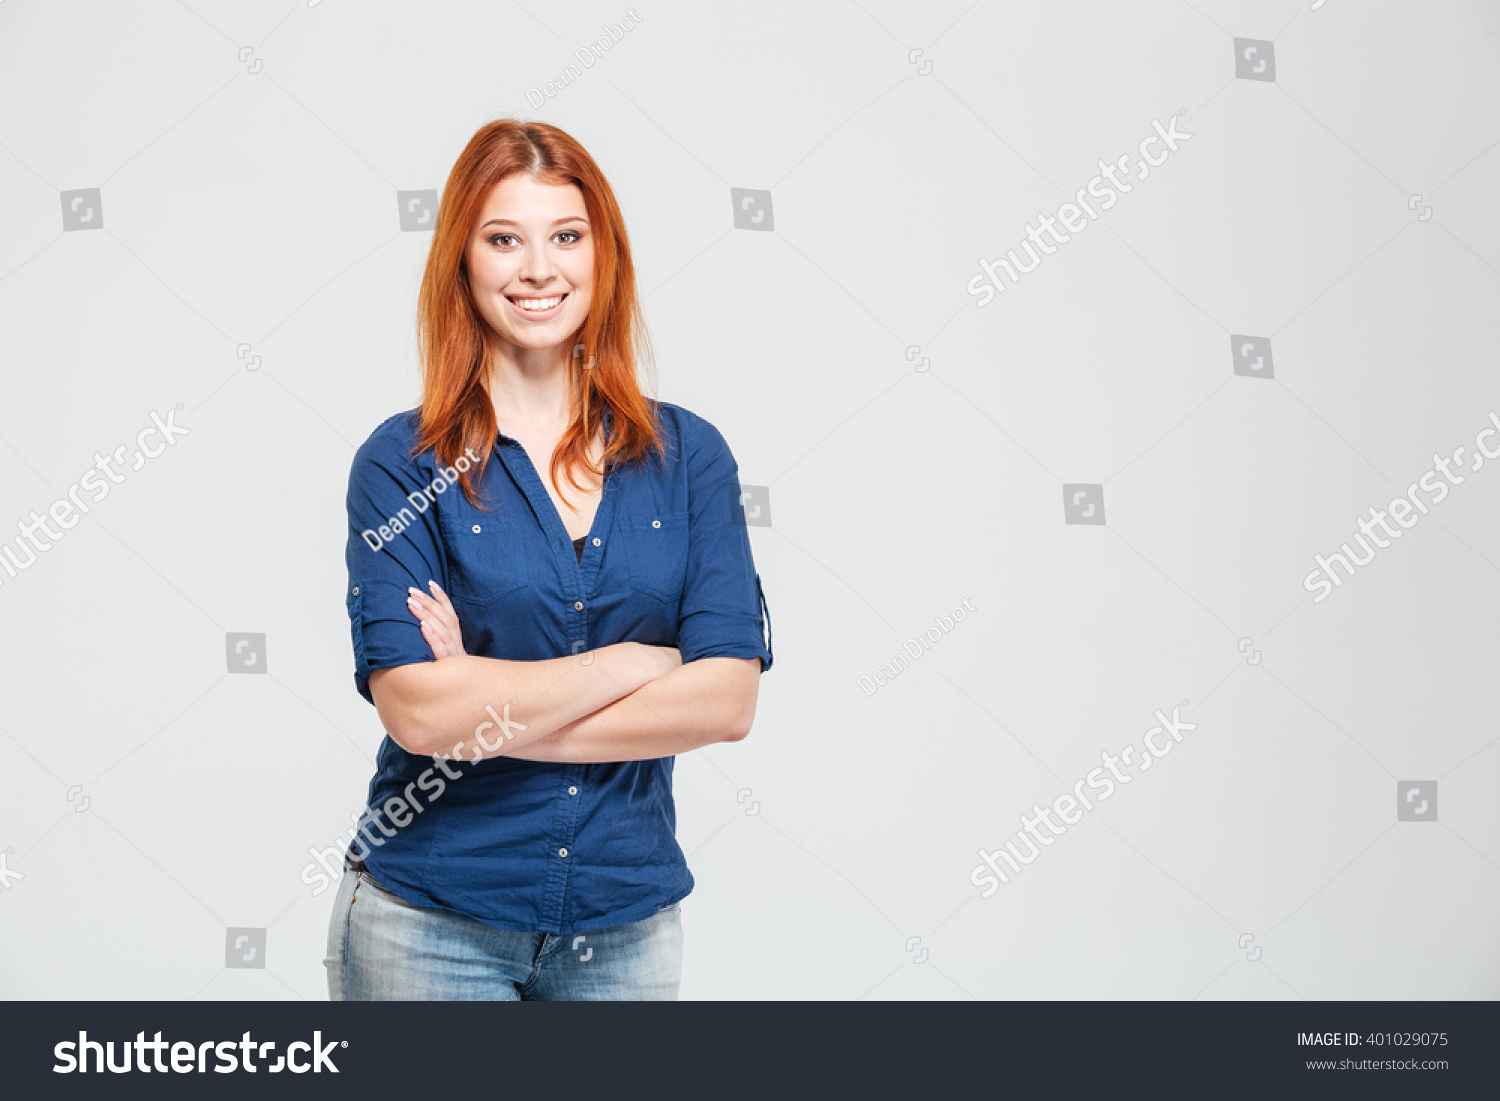 Cheerful pretty redhead young woman standing with hands folded over white background #401029075